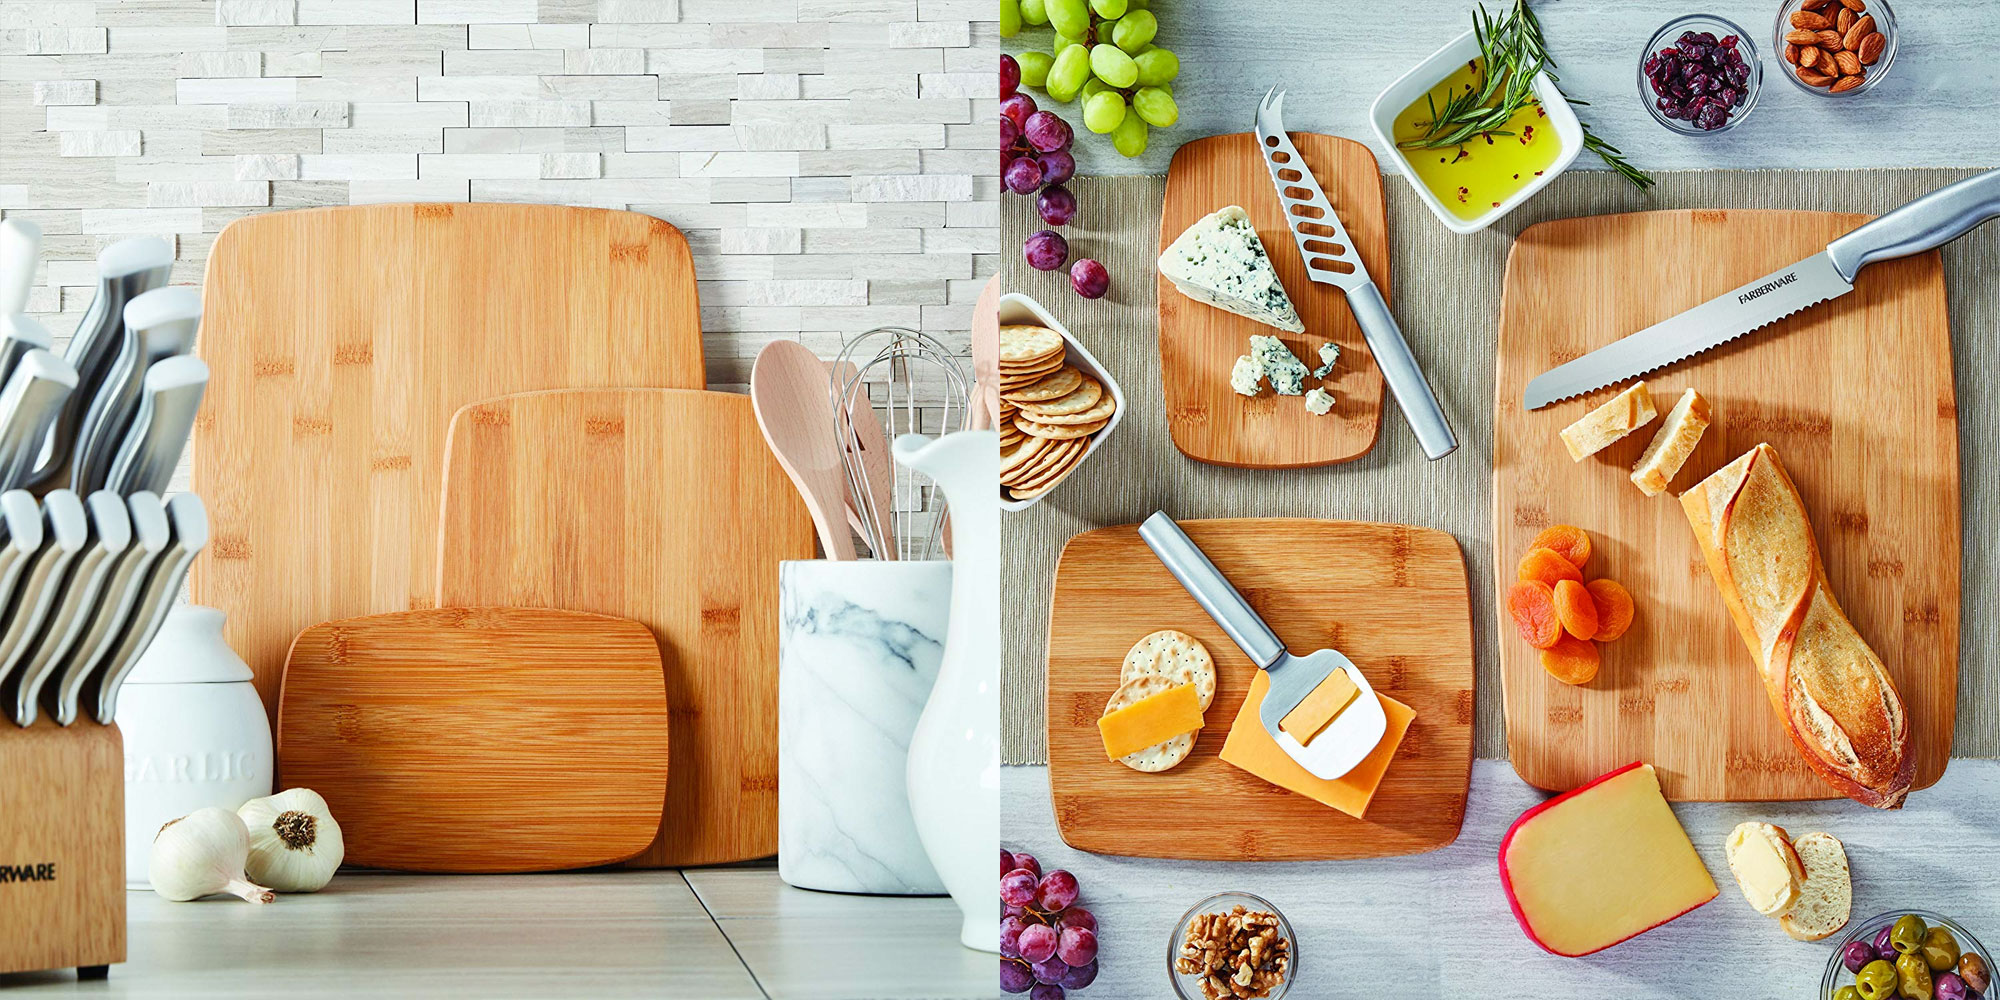 Pack of 5 Thick Bamboo Cutting Boards (Starting at $6 Each